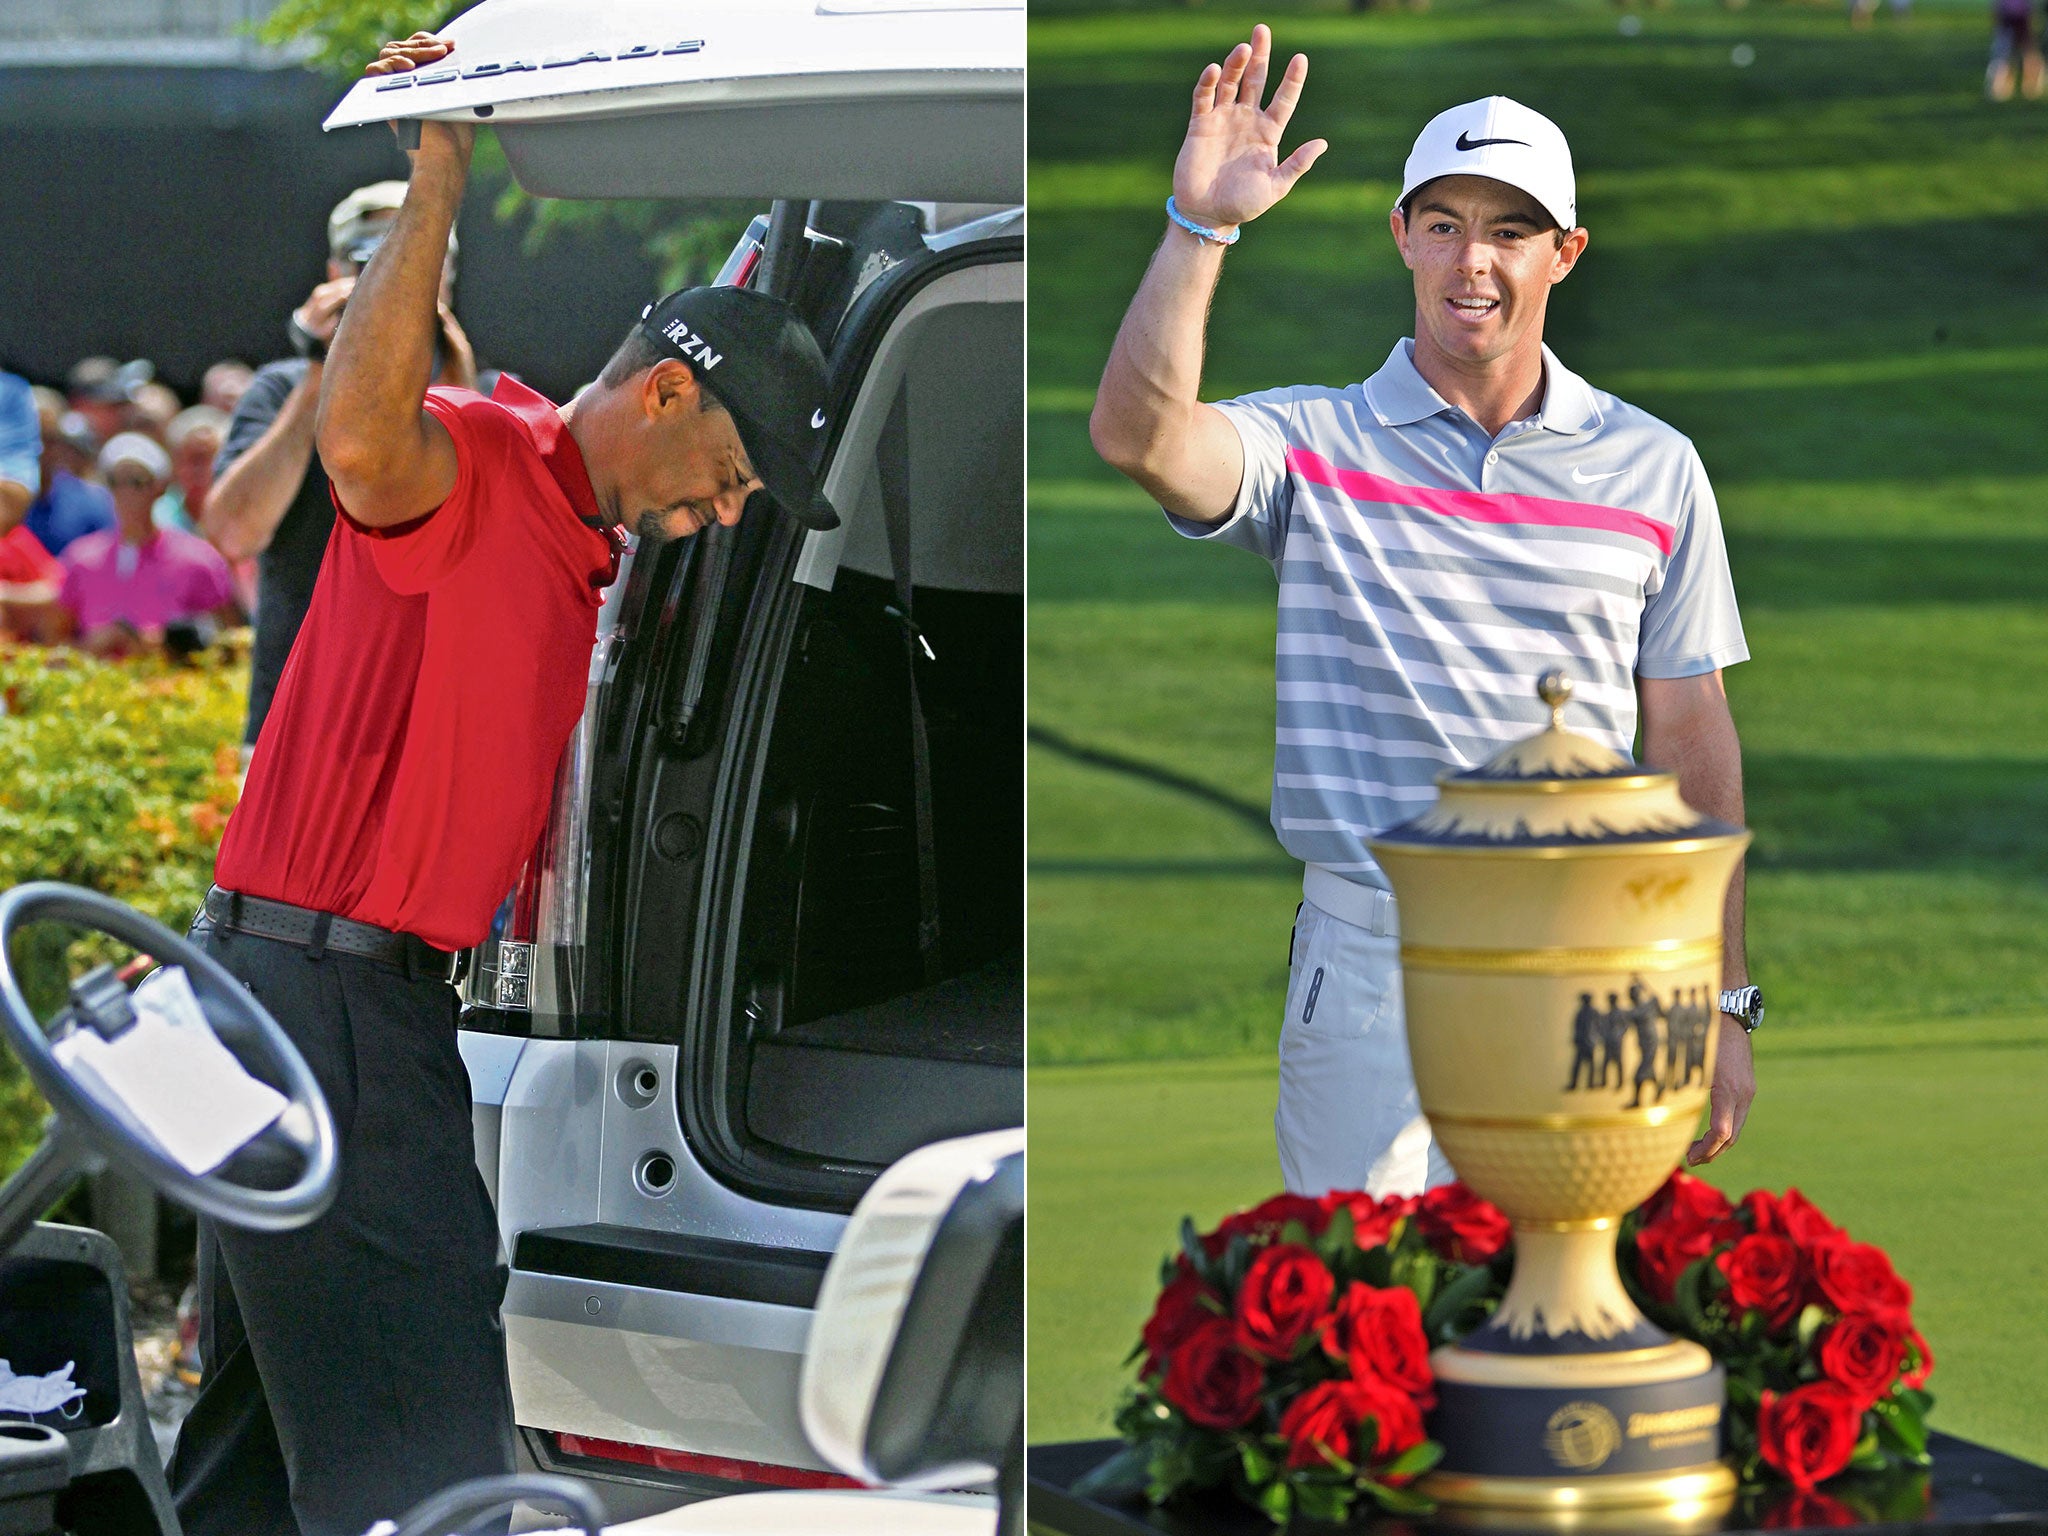 Tiger Woods (left) holds on to the tailgate of his car in pain after withdrawing from the Bridgestone while (right) Rory McIlroy waves to his fans following his victory